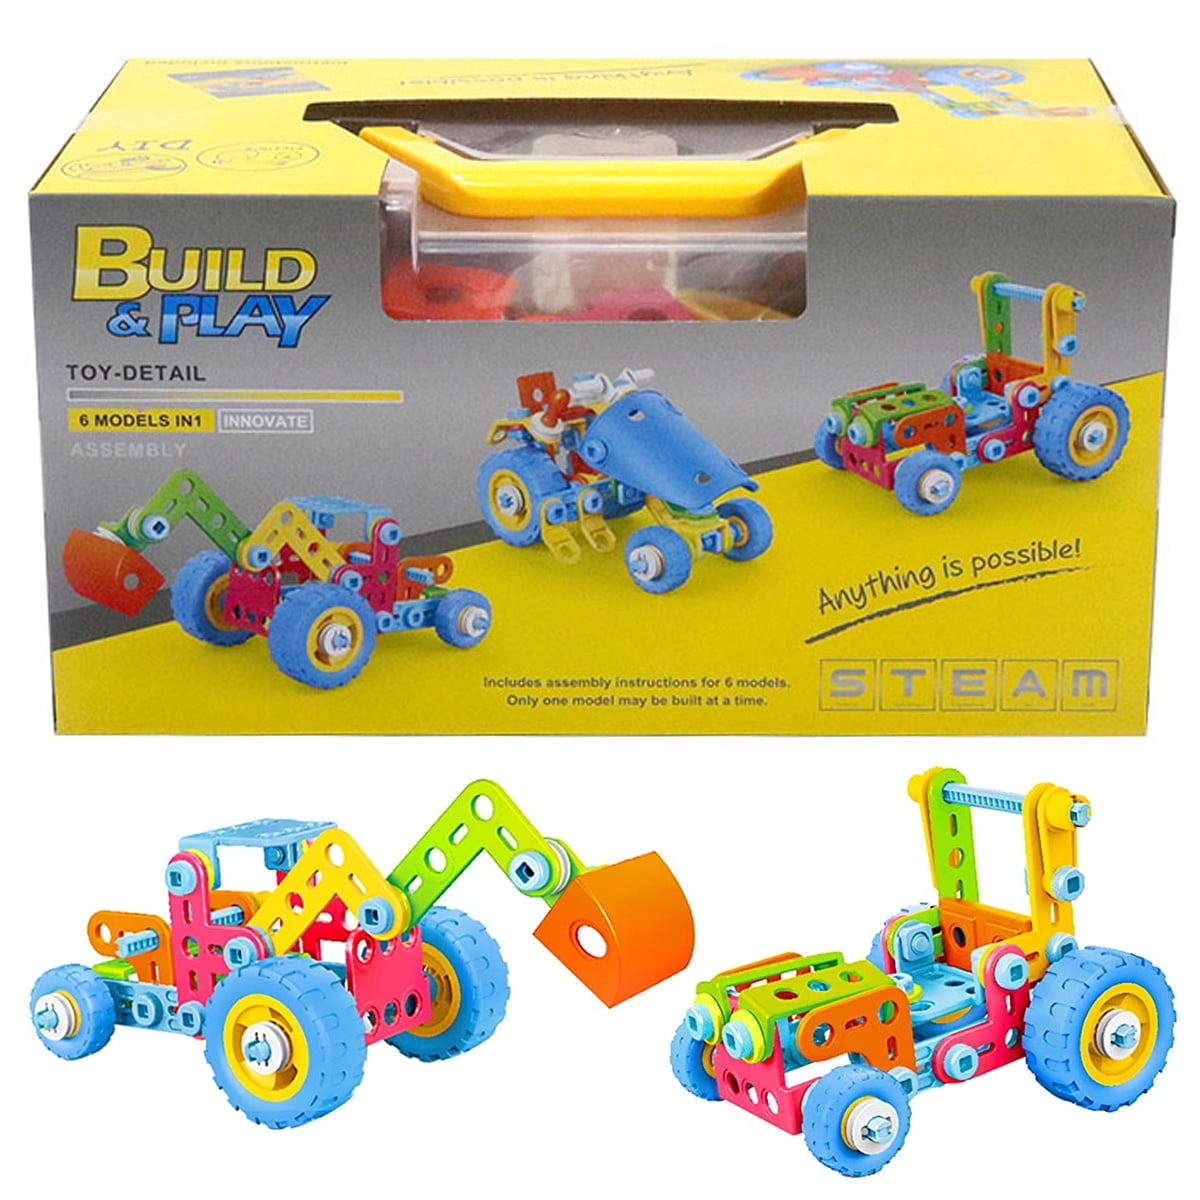 Kids Craft Kit Build & Paint Wooden Race Car for 4-8 Ages UNIH DIY Wooden Model Cars 3D Wooden Puzzle STEM Educational Building Project for Boys & Girls,3 in 1 Set